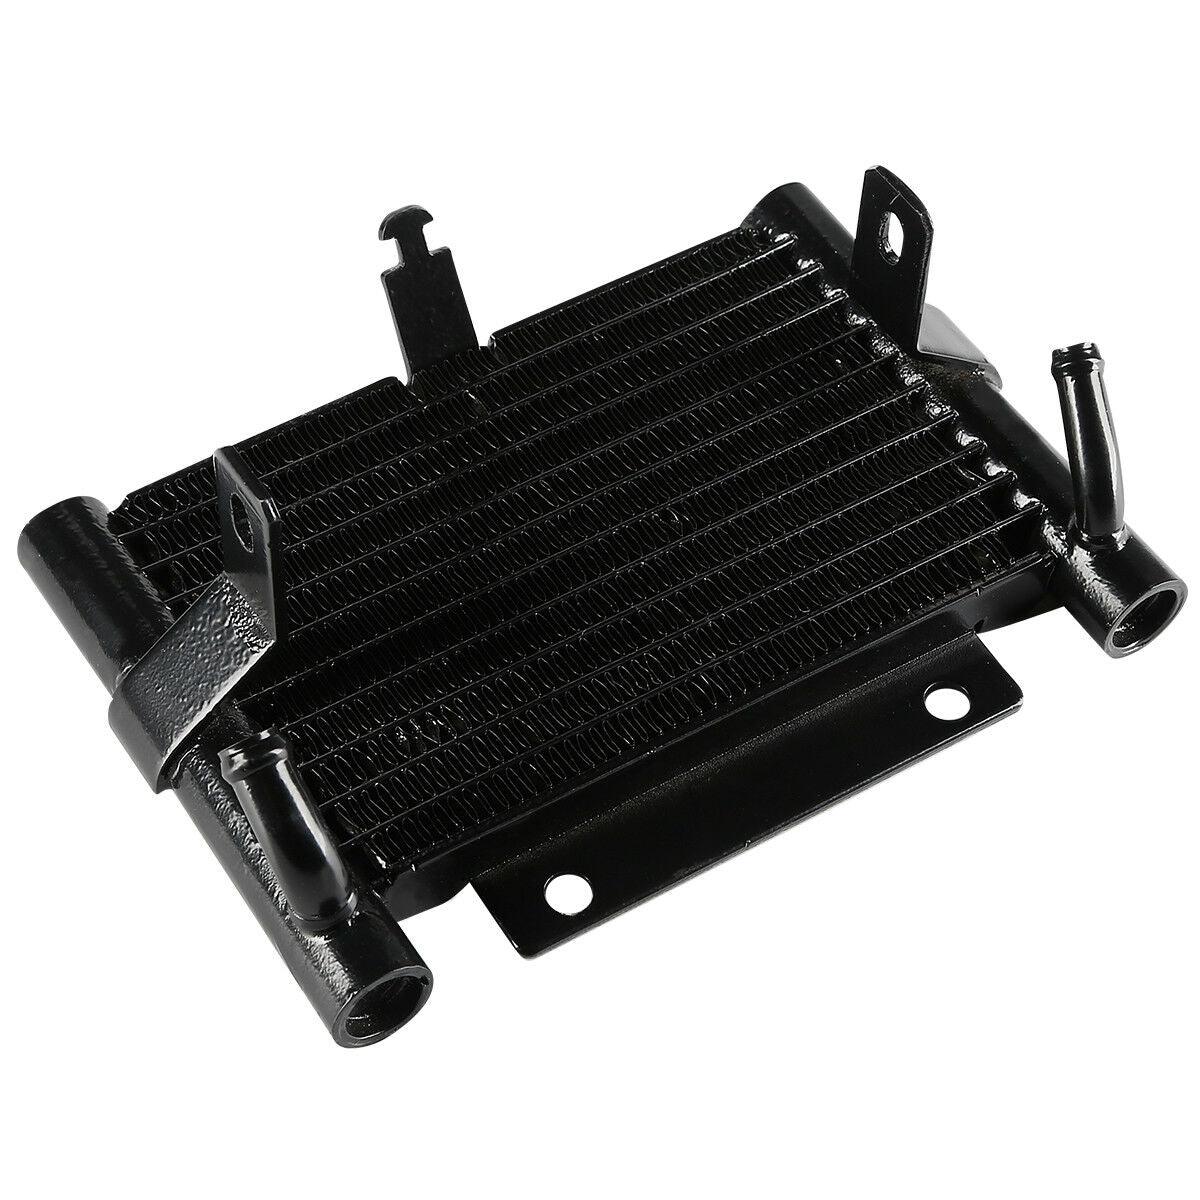 Oil Cooler Fit For Harley Touring Electra Street Glide Road King 2017-2021 Black - Moto Life Products